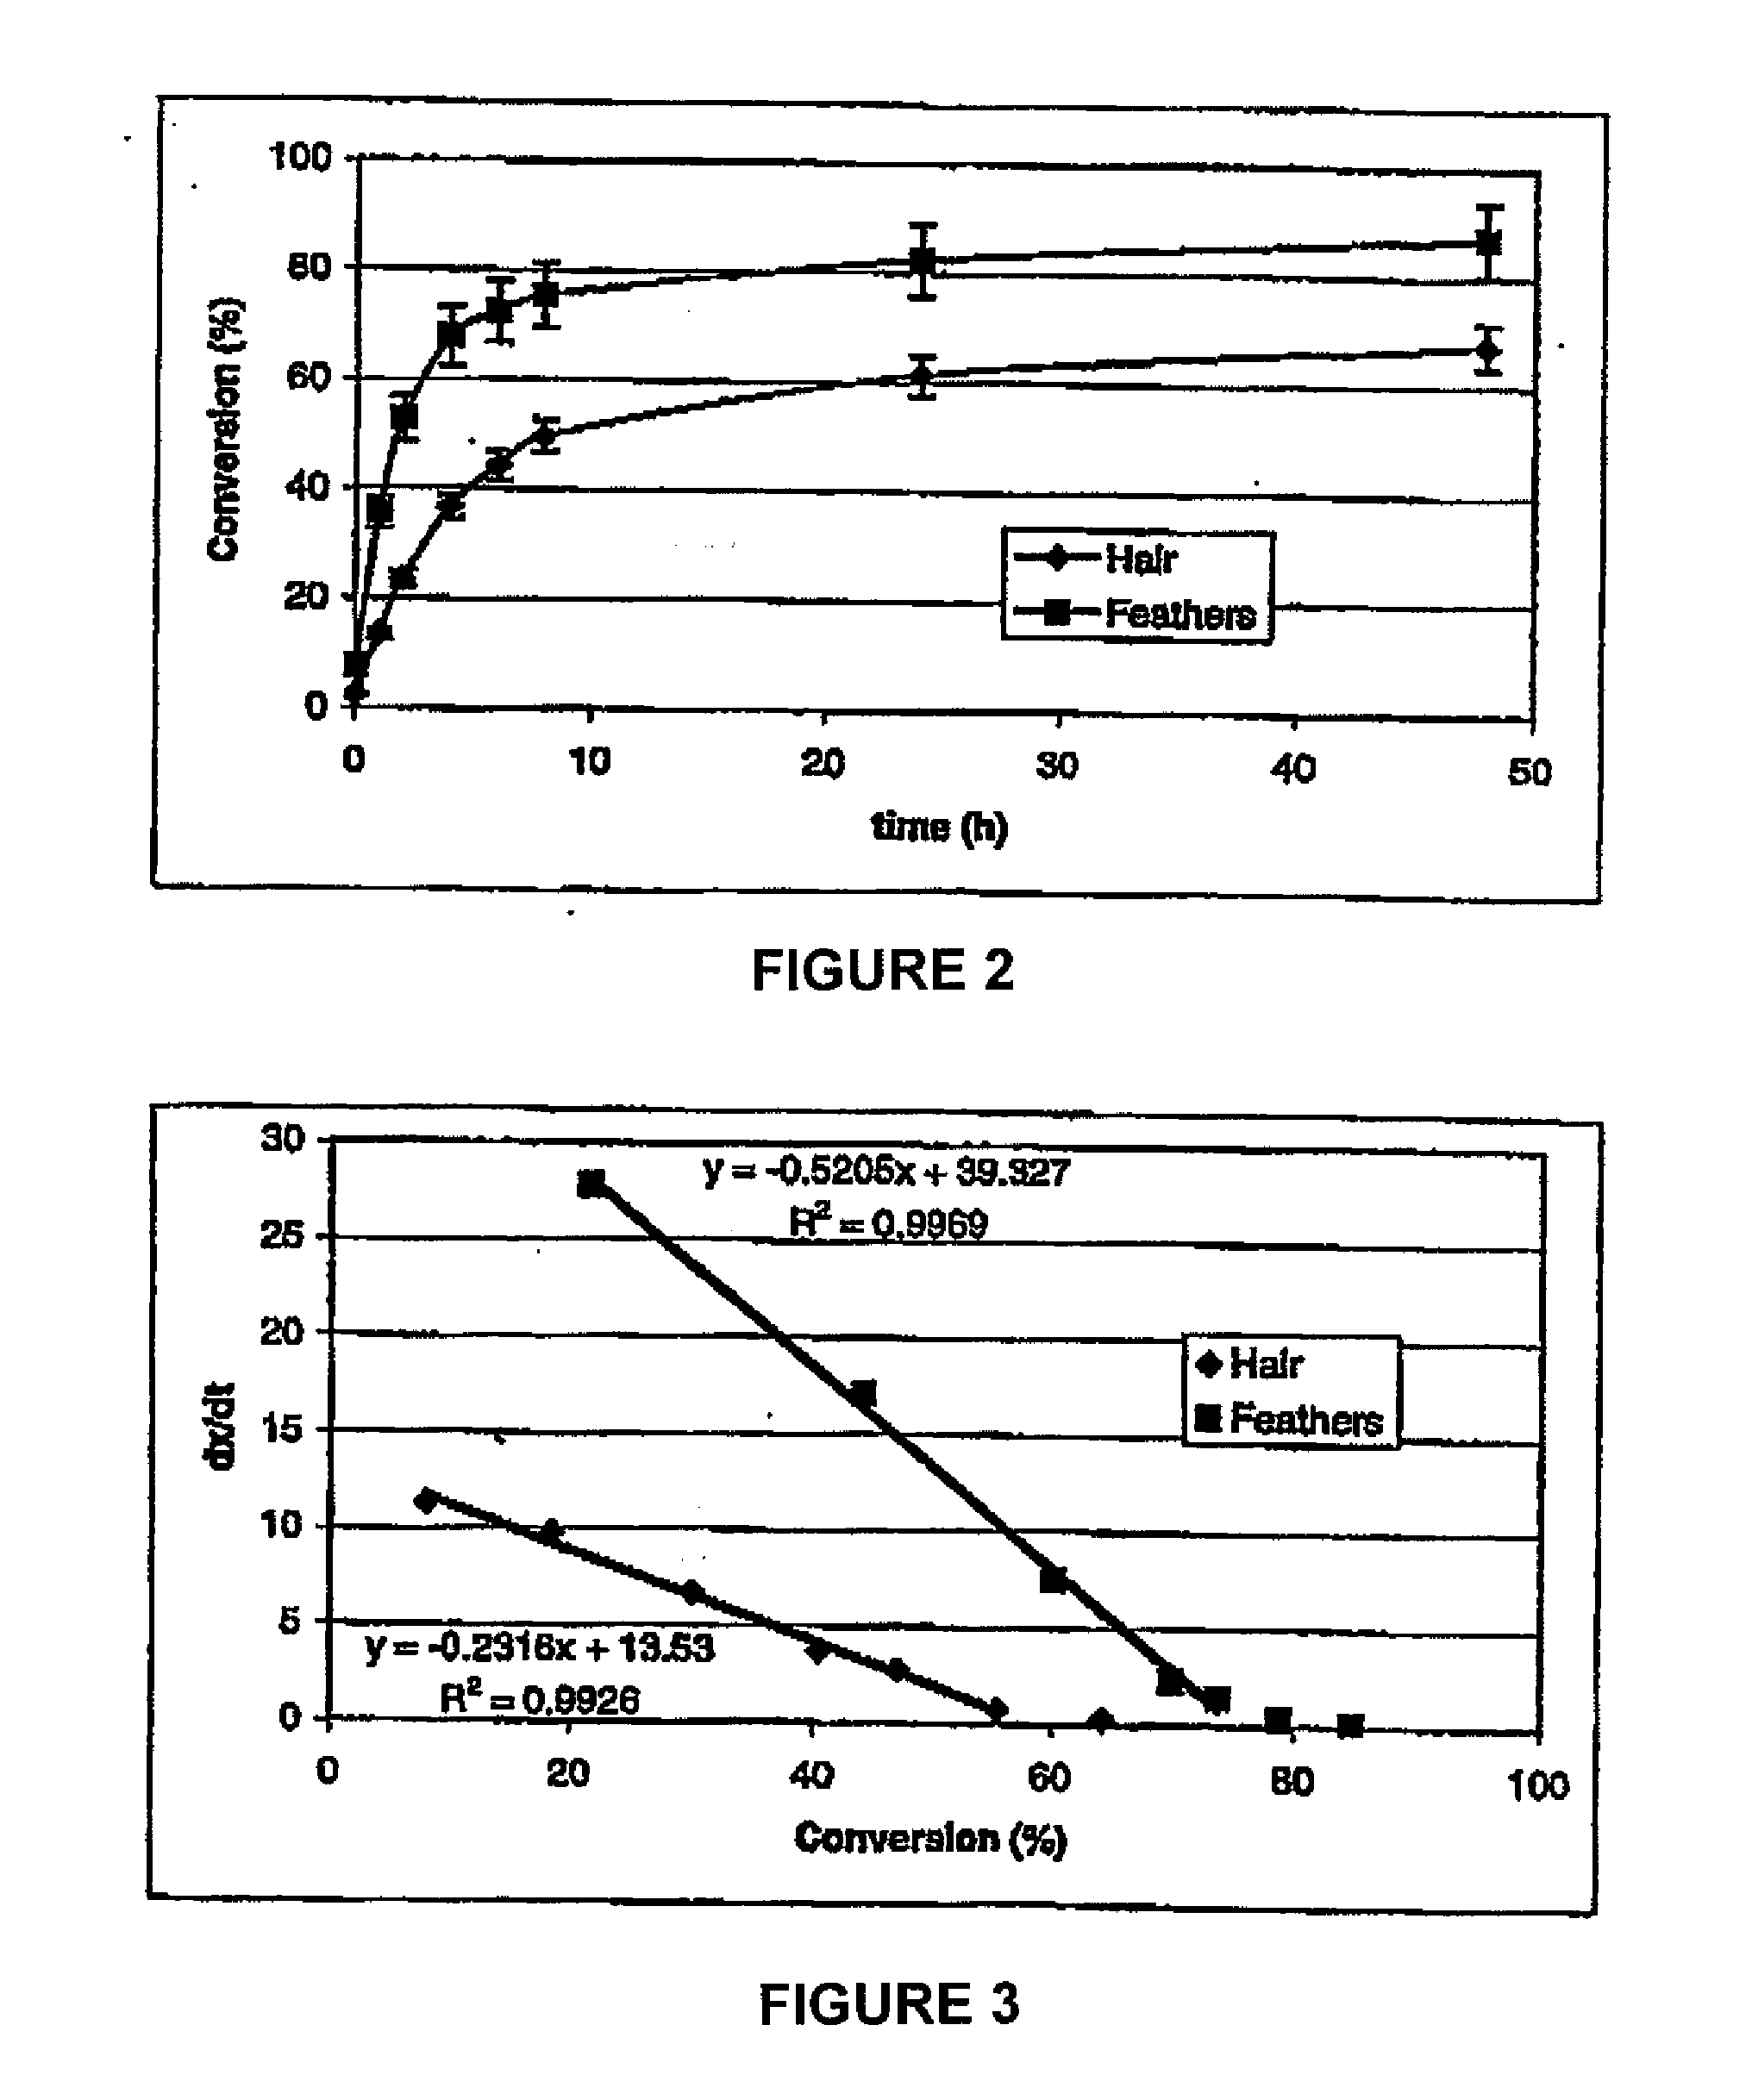 Method and system for solubilizing protein